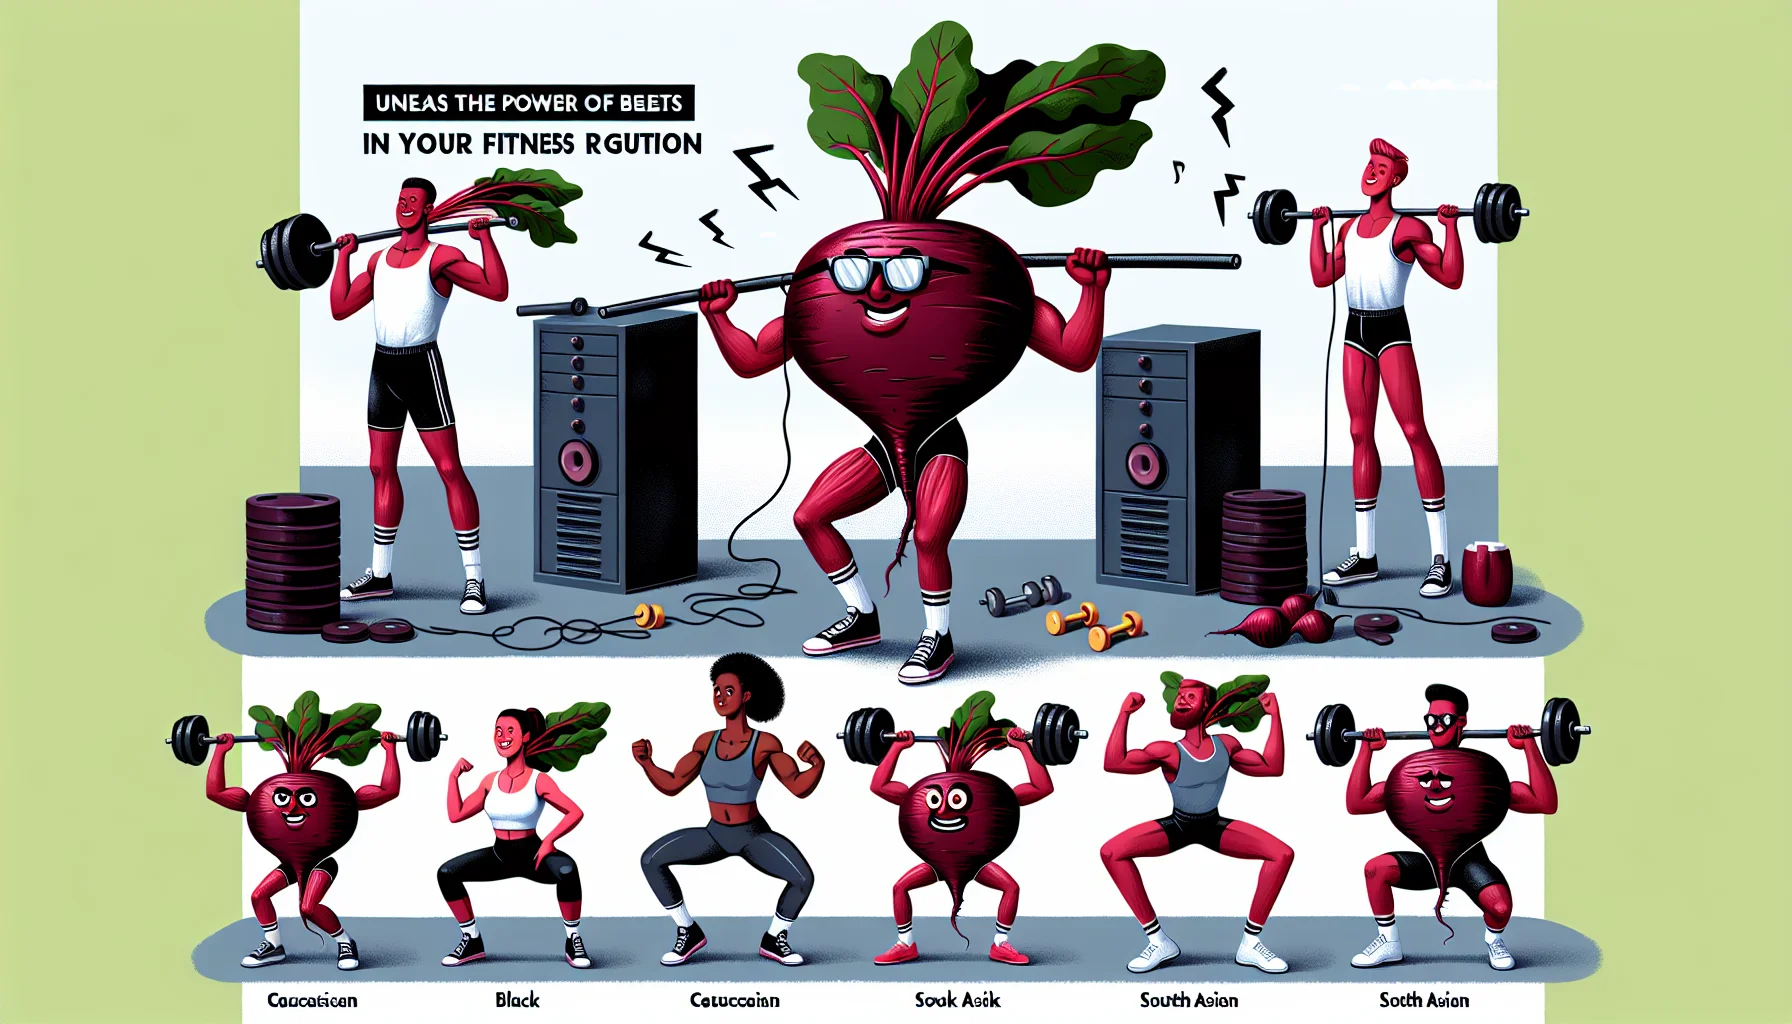 Create a visually enticing image showcasing the humor and power of red beets in a fitness context. Illustrate a caricatured long beetroots, hilariously dressed in workout gear, demonstrating various exercises such as lifting weights or doing squats. Incorporate a setting of a gym with various fitness equipments to indicate a fitness routine. Show different people of multiple descents, Caucasian, Black, South Asian, inspired and joining in with their own beets. Add a banner somewhere in the image with the text 'Unleash the Power of Beets in Your Fitness Regimen'.